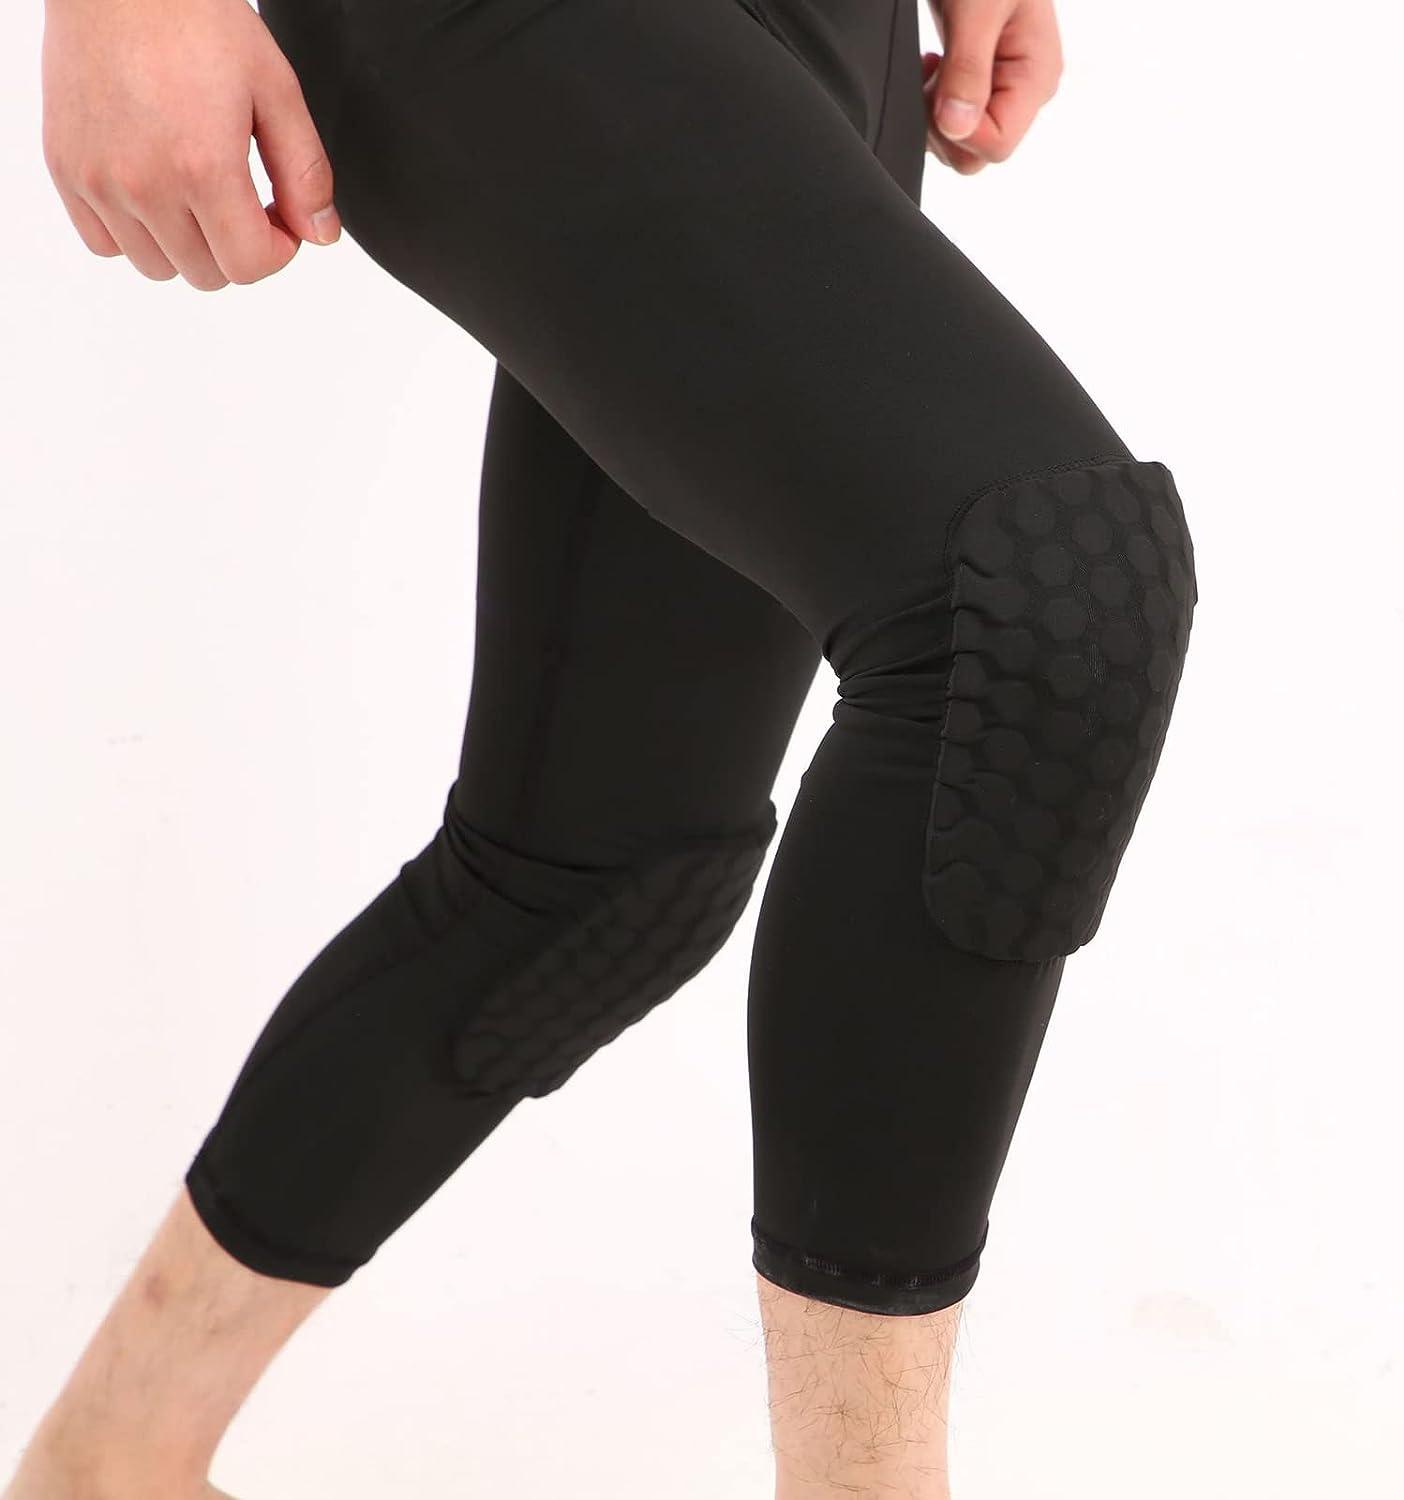 3/4 tights with knee padding –